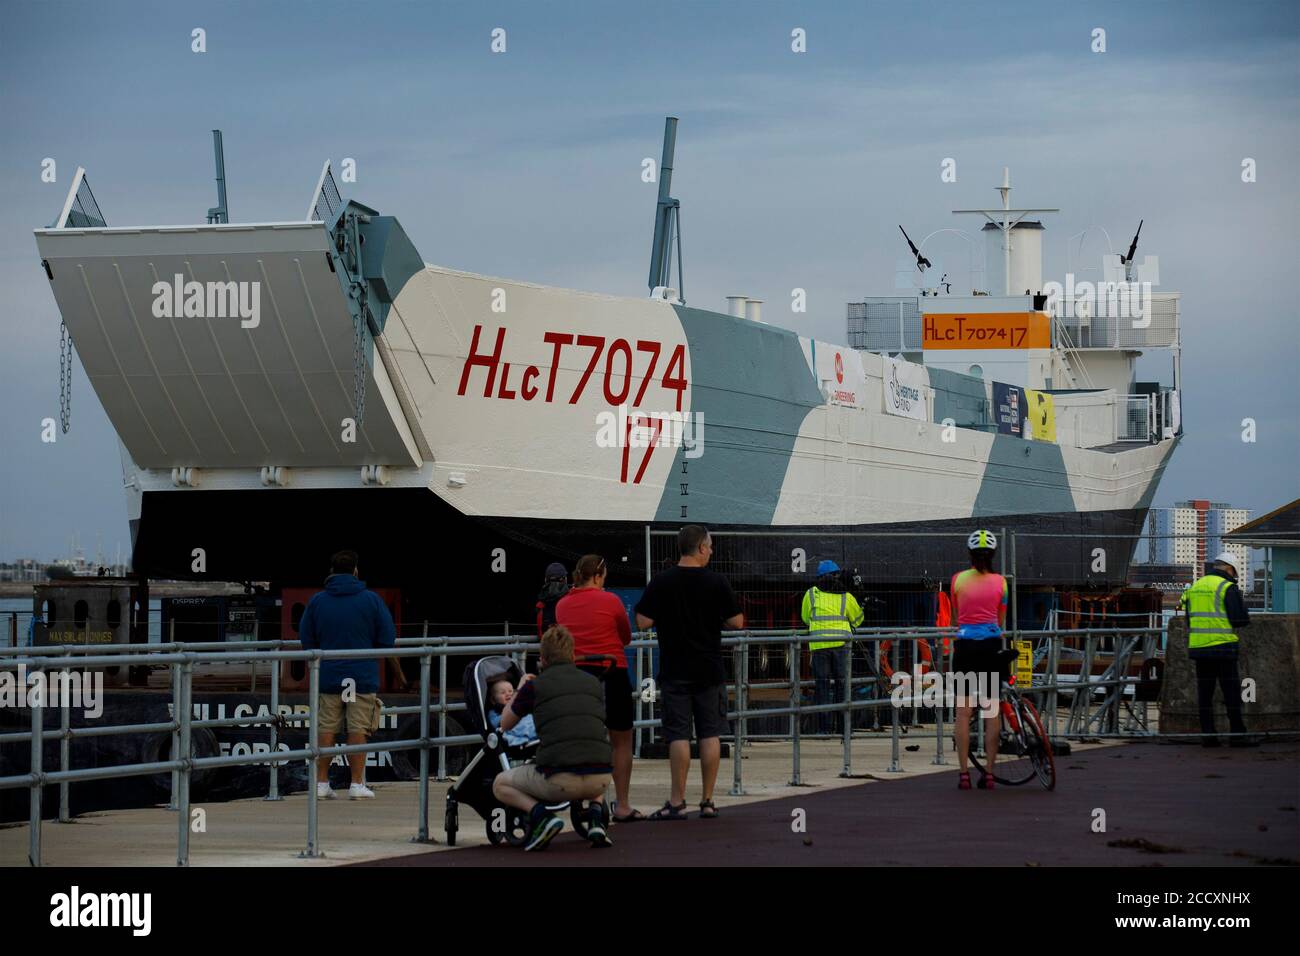 Portsmouth, Hampshire, UK. 24th Aug 2020. Bystanders watch the LCT 7074, the last surviving amphibious landing craft tank, before it is moved to the D-Day Museum in Portsmouth, Monday August 24, 2020.  The craft which originally carried tanks and soldiers to Normandy, was floated by barge from the National Museum of the Royal Navy, where it was being restored, to the Promenade in Southsea, where a crane built a bridge to the barge, so it could be driven to its new home at the D-Day Museum. Credit: Luke MacGregor/Alamy Live News Stock Photo